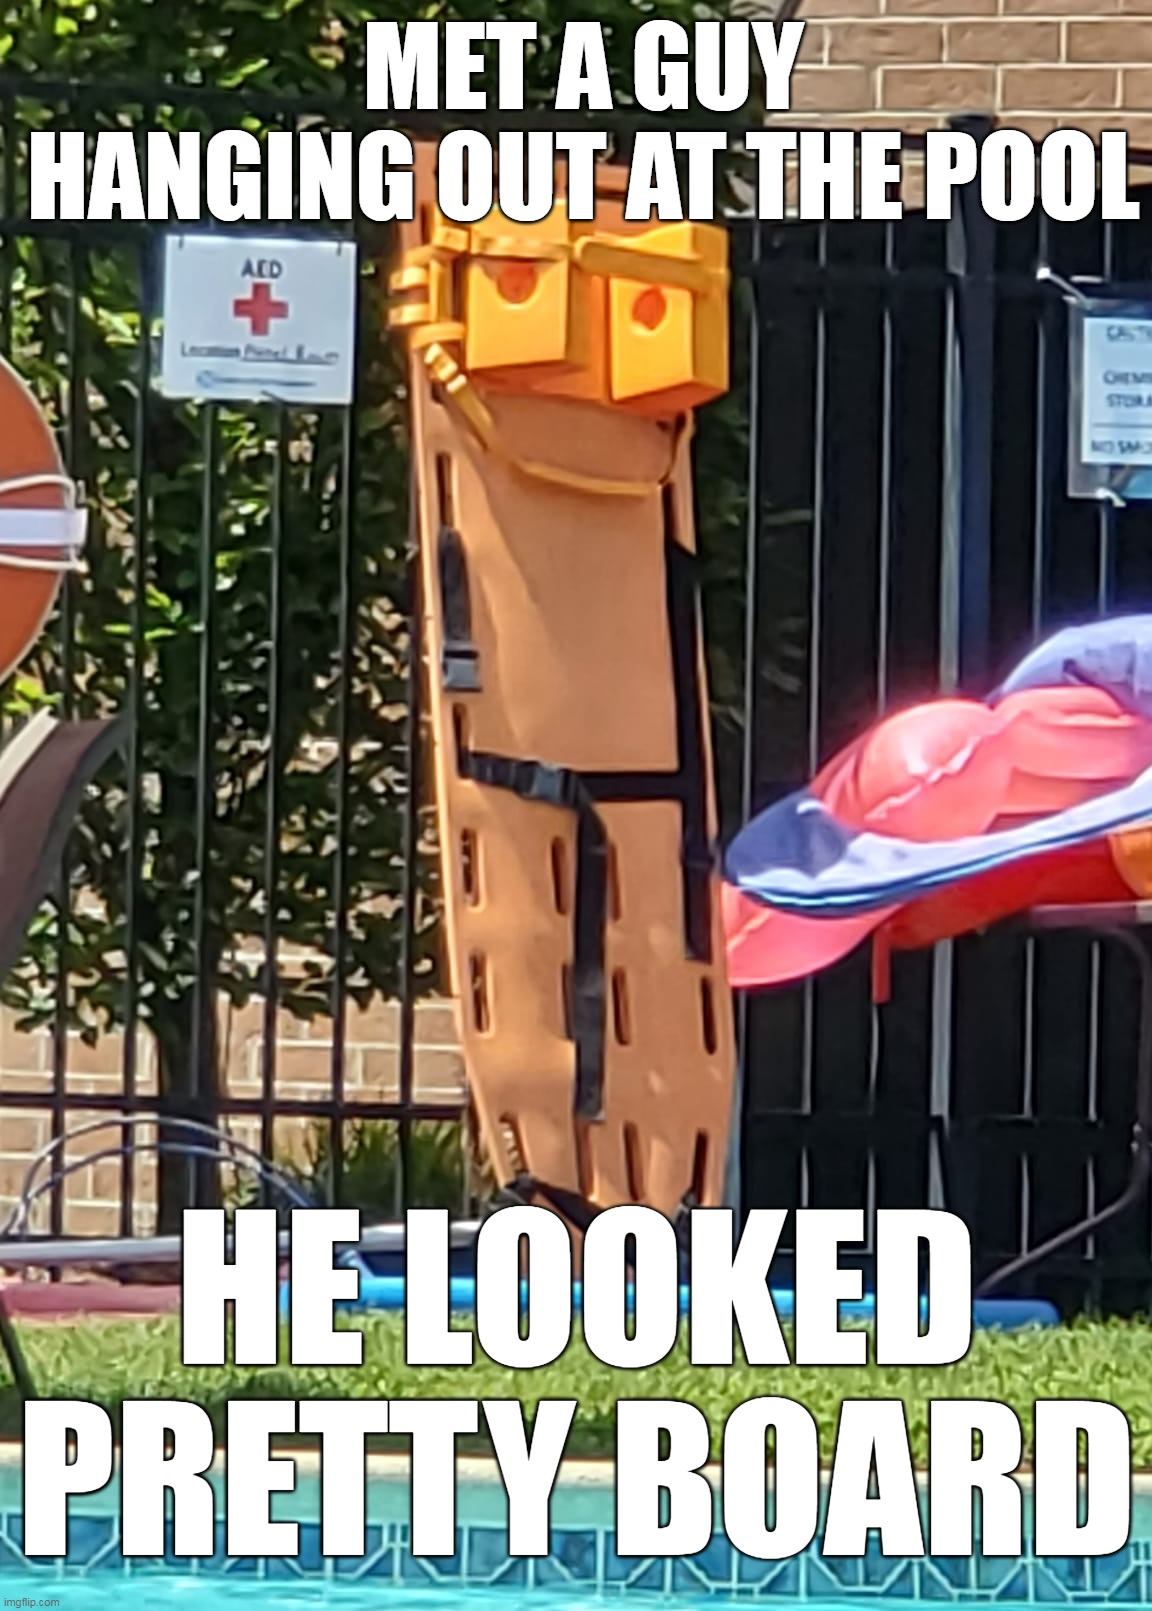 MET A GUY HANGING OUT AT THE POOL; HE LOOKED PRETTY BOARD | image tagged in meme,memes,humor,puns | made w/ Imgflip meme maker